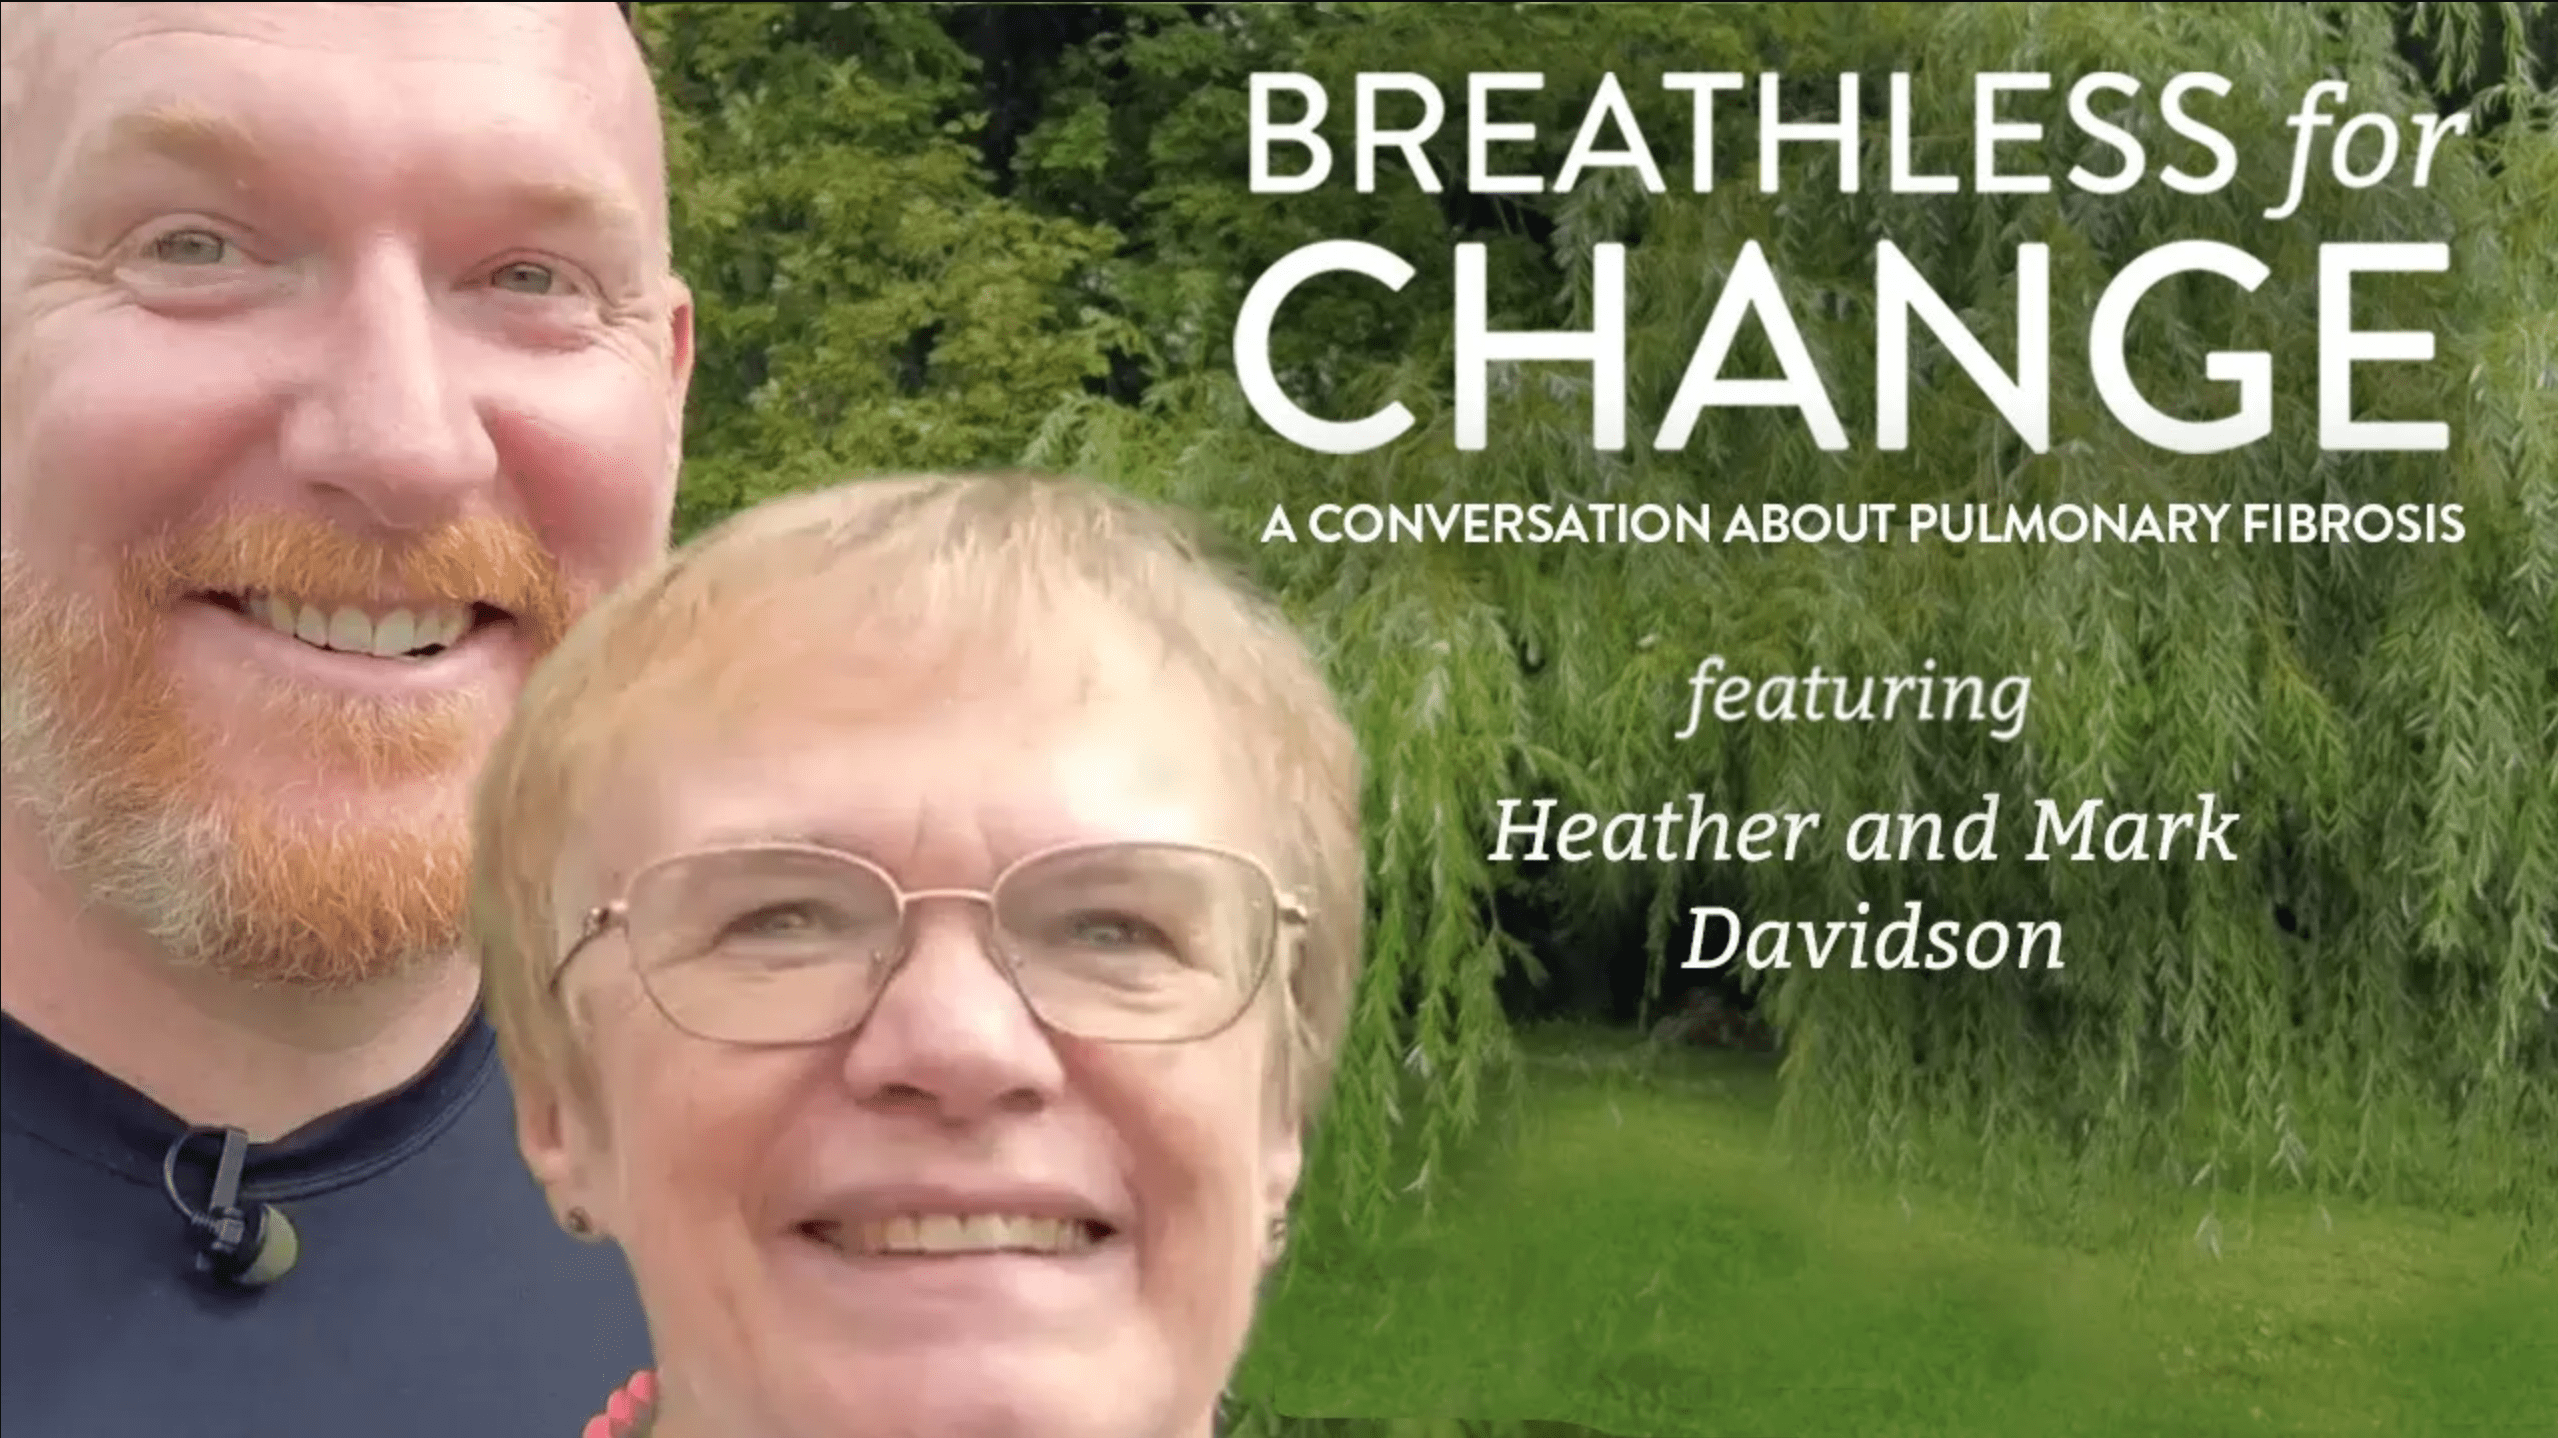 Man and woman with text: "BREATHLESS for CHANGE: A CONVERSATION ABOUT PULMONARY FIBROSIS featuring Heather and Mark Davidson"